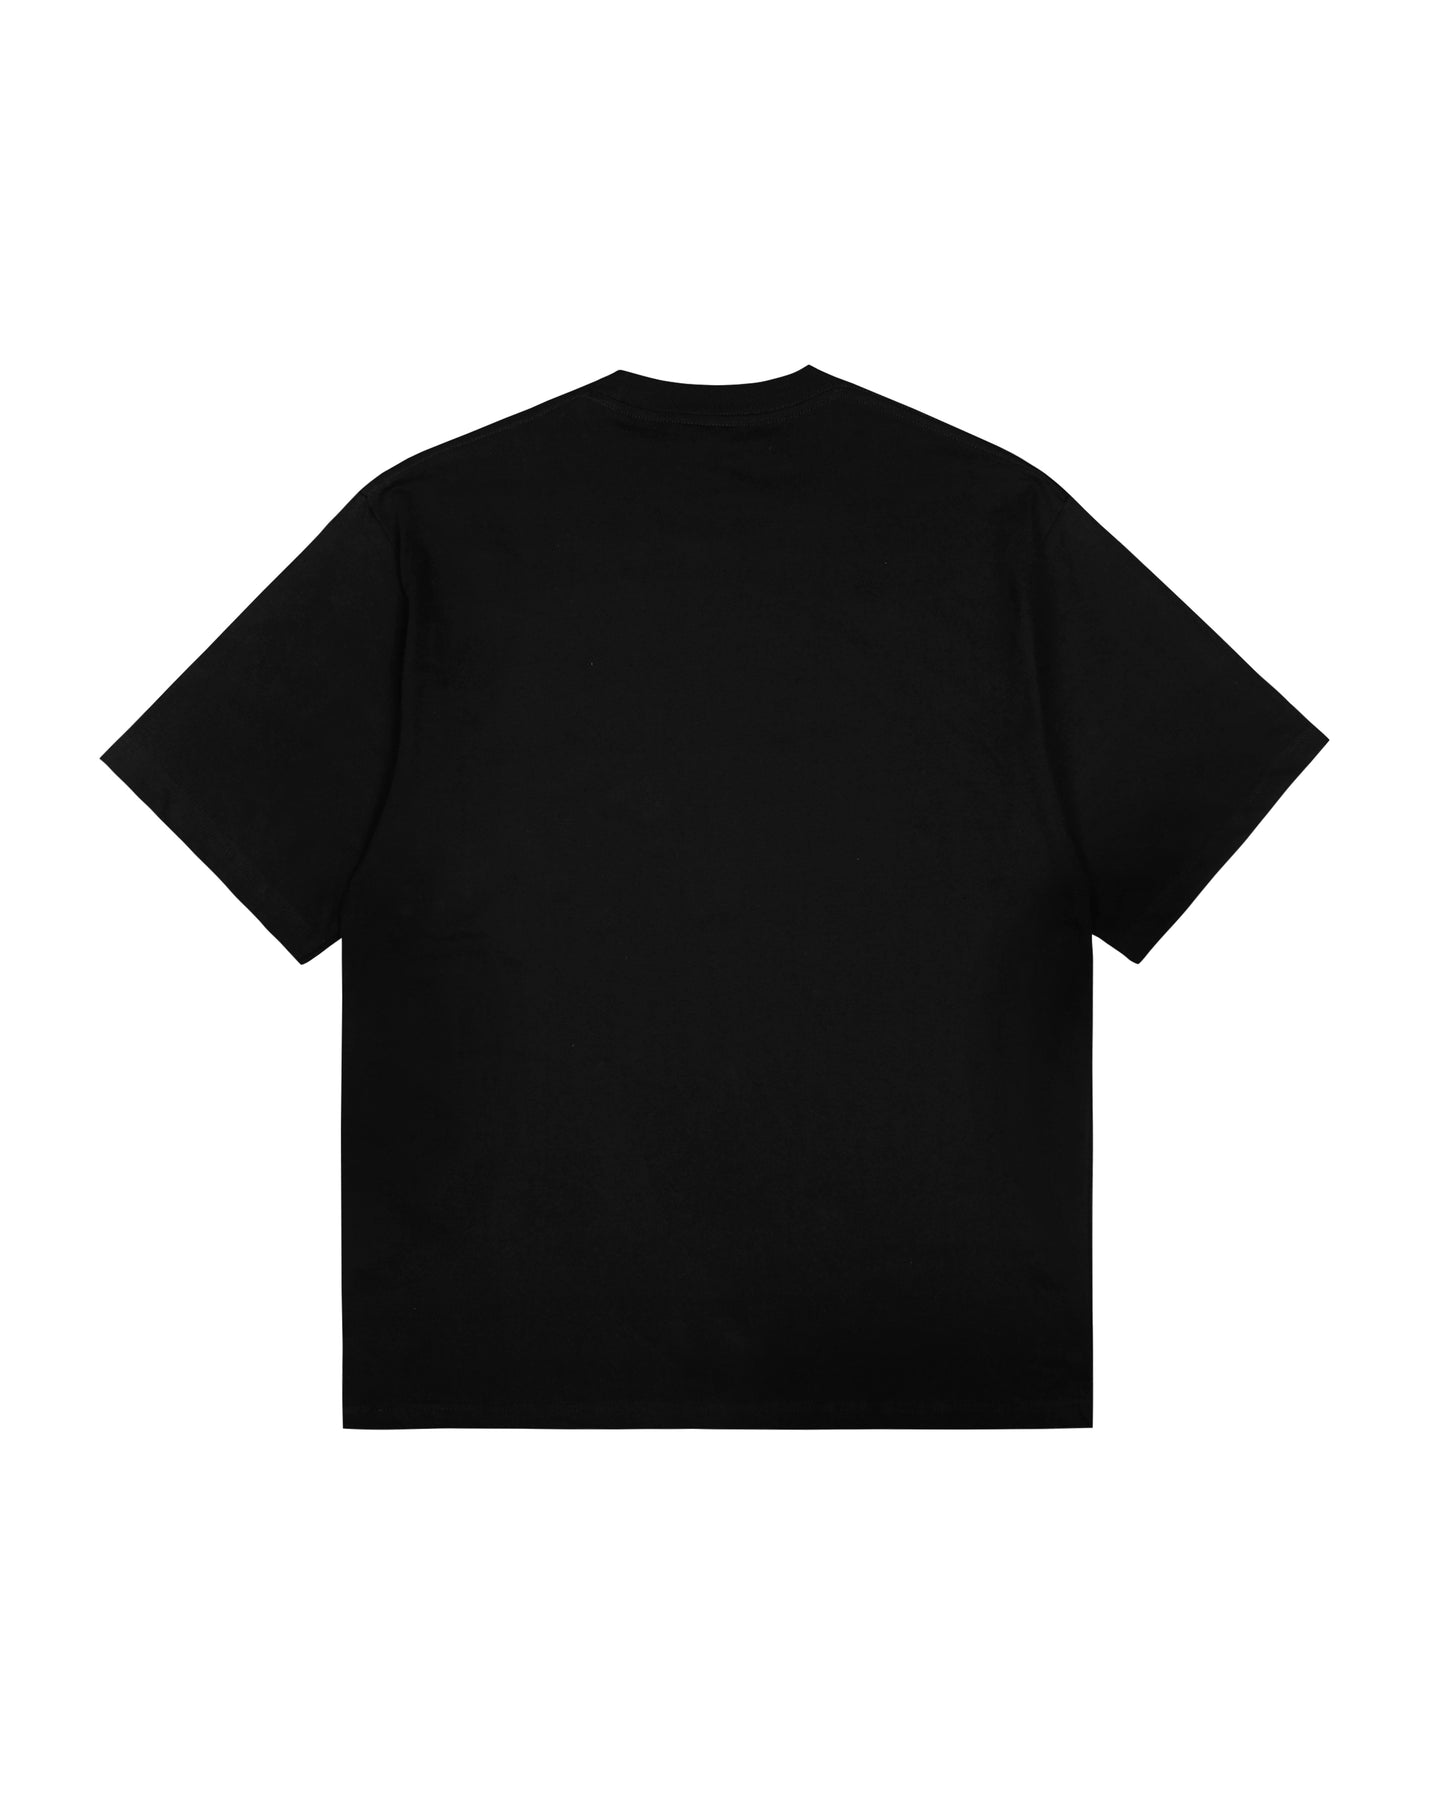 Vivus Black Tees - Relaxed Fit